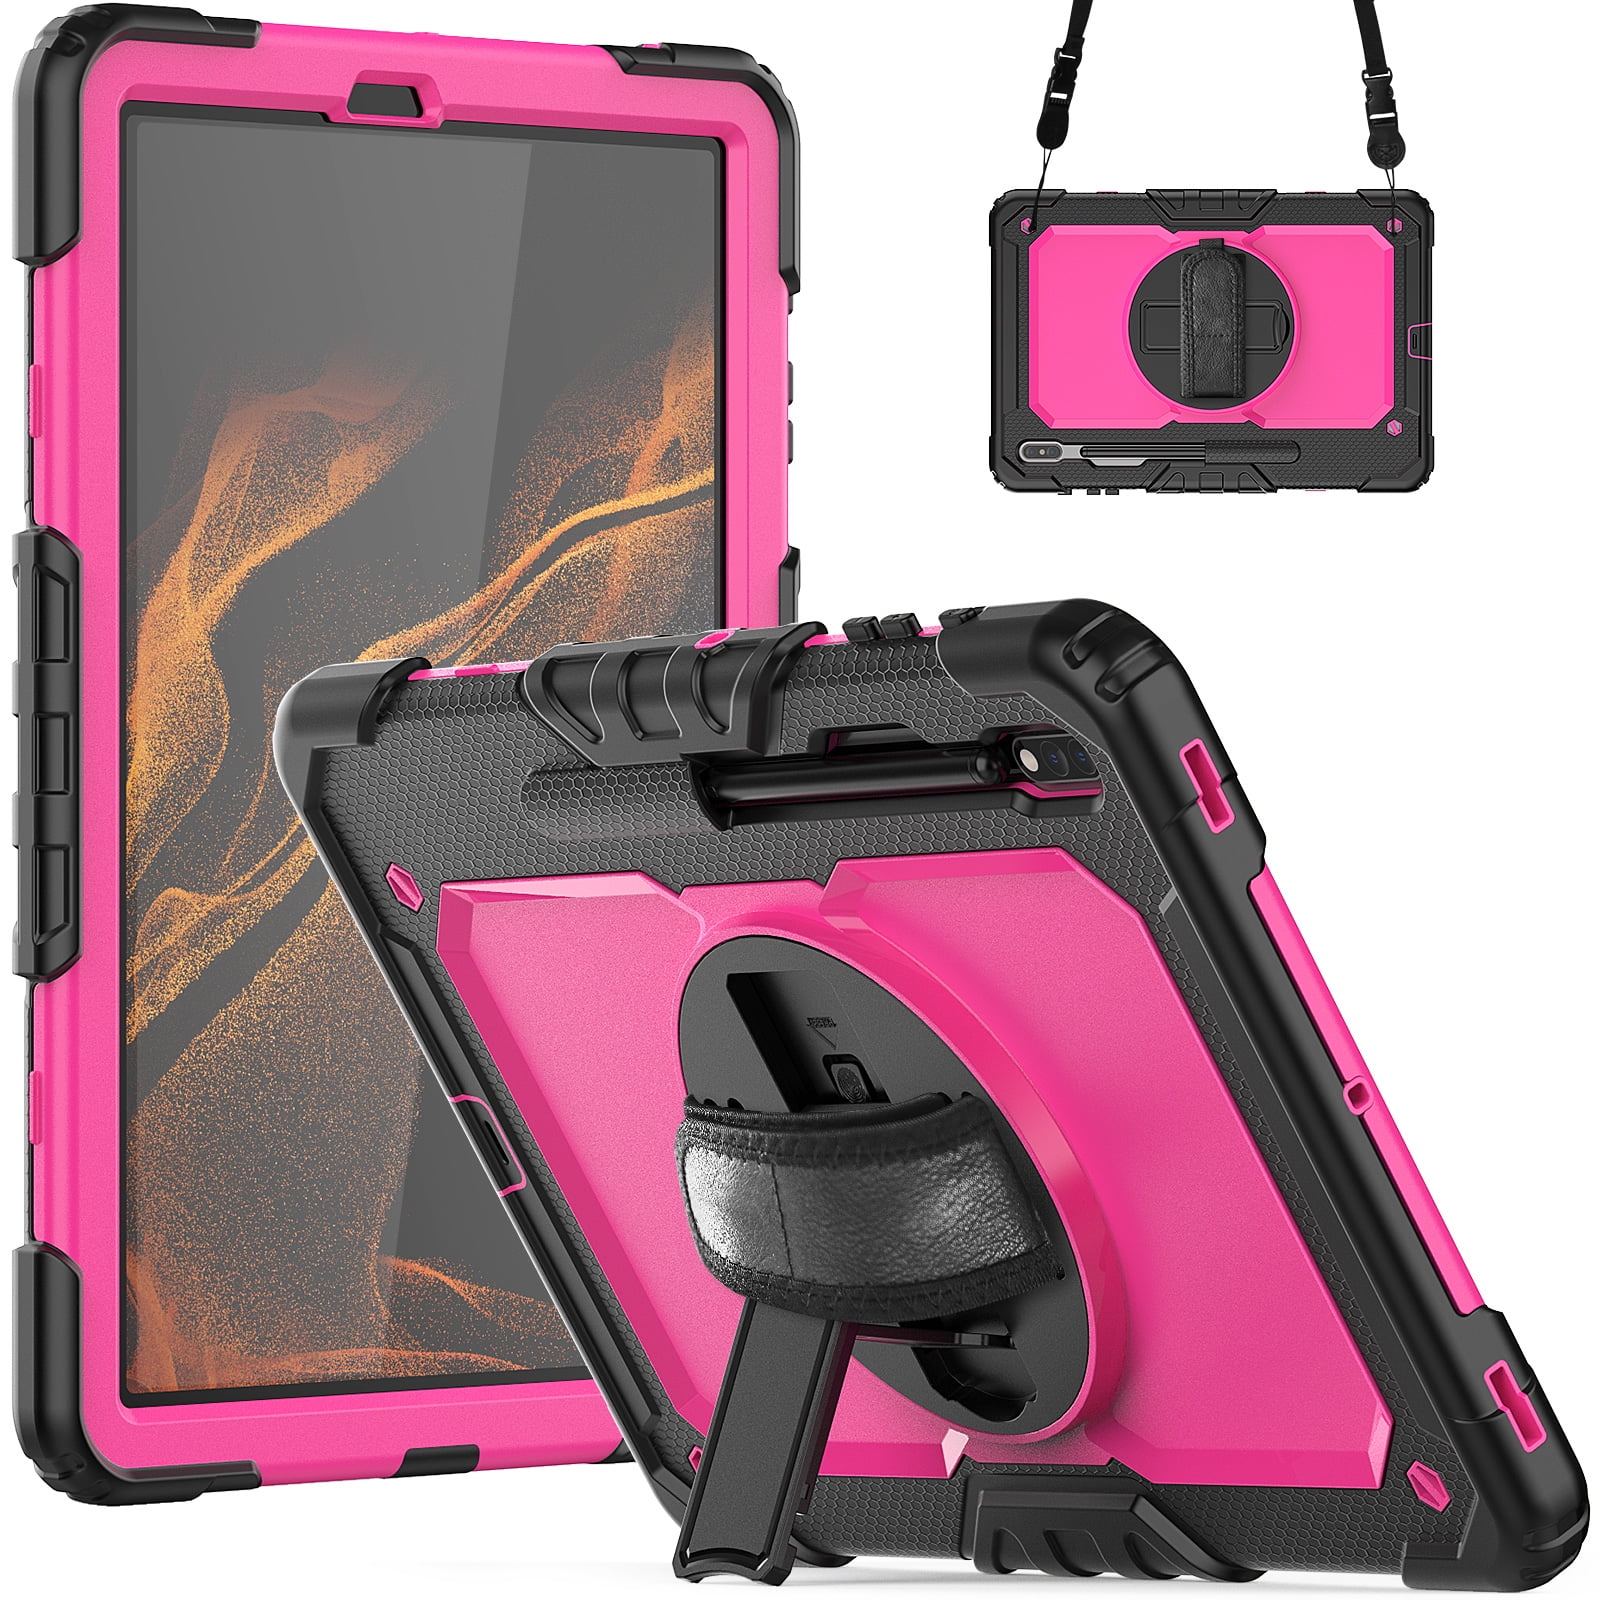 Allytech Case for Samsung Galaxy Tab S8 Plus/S8+ 12.4\'\' (2022) / S7 FE 5G  (2021) / S7 Plus (2020) 12.4 inch Heavy Duty Case With Screen Protector&360  Degree Swivel Kickstand & Hand Shoulder Strap